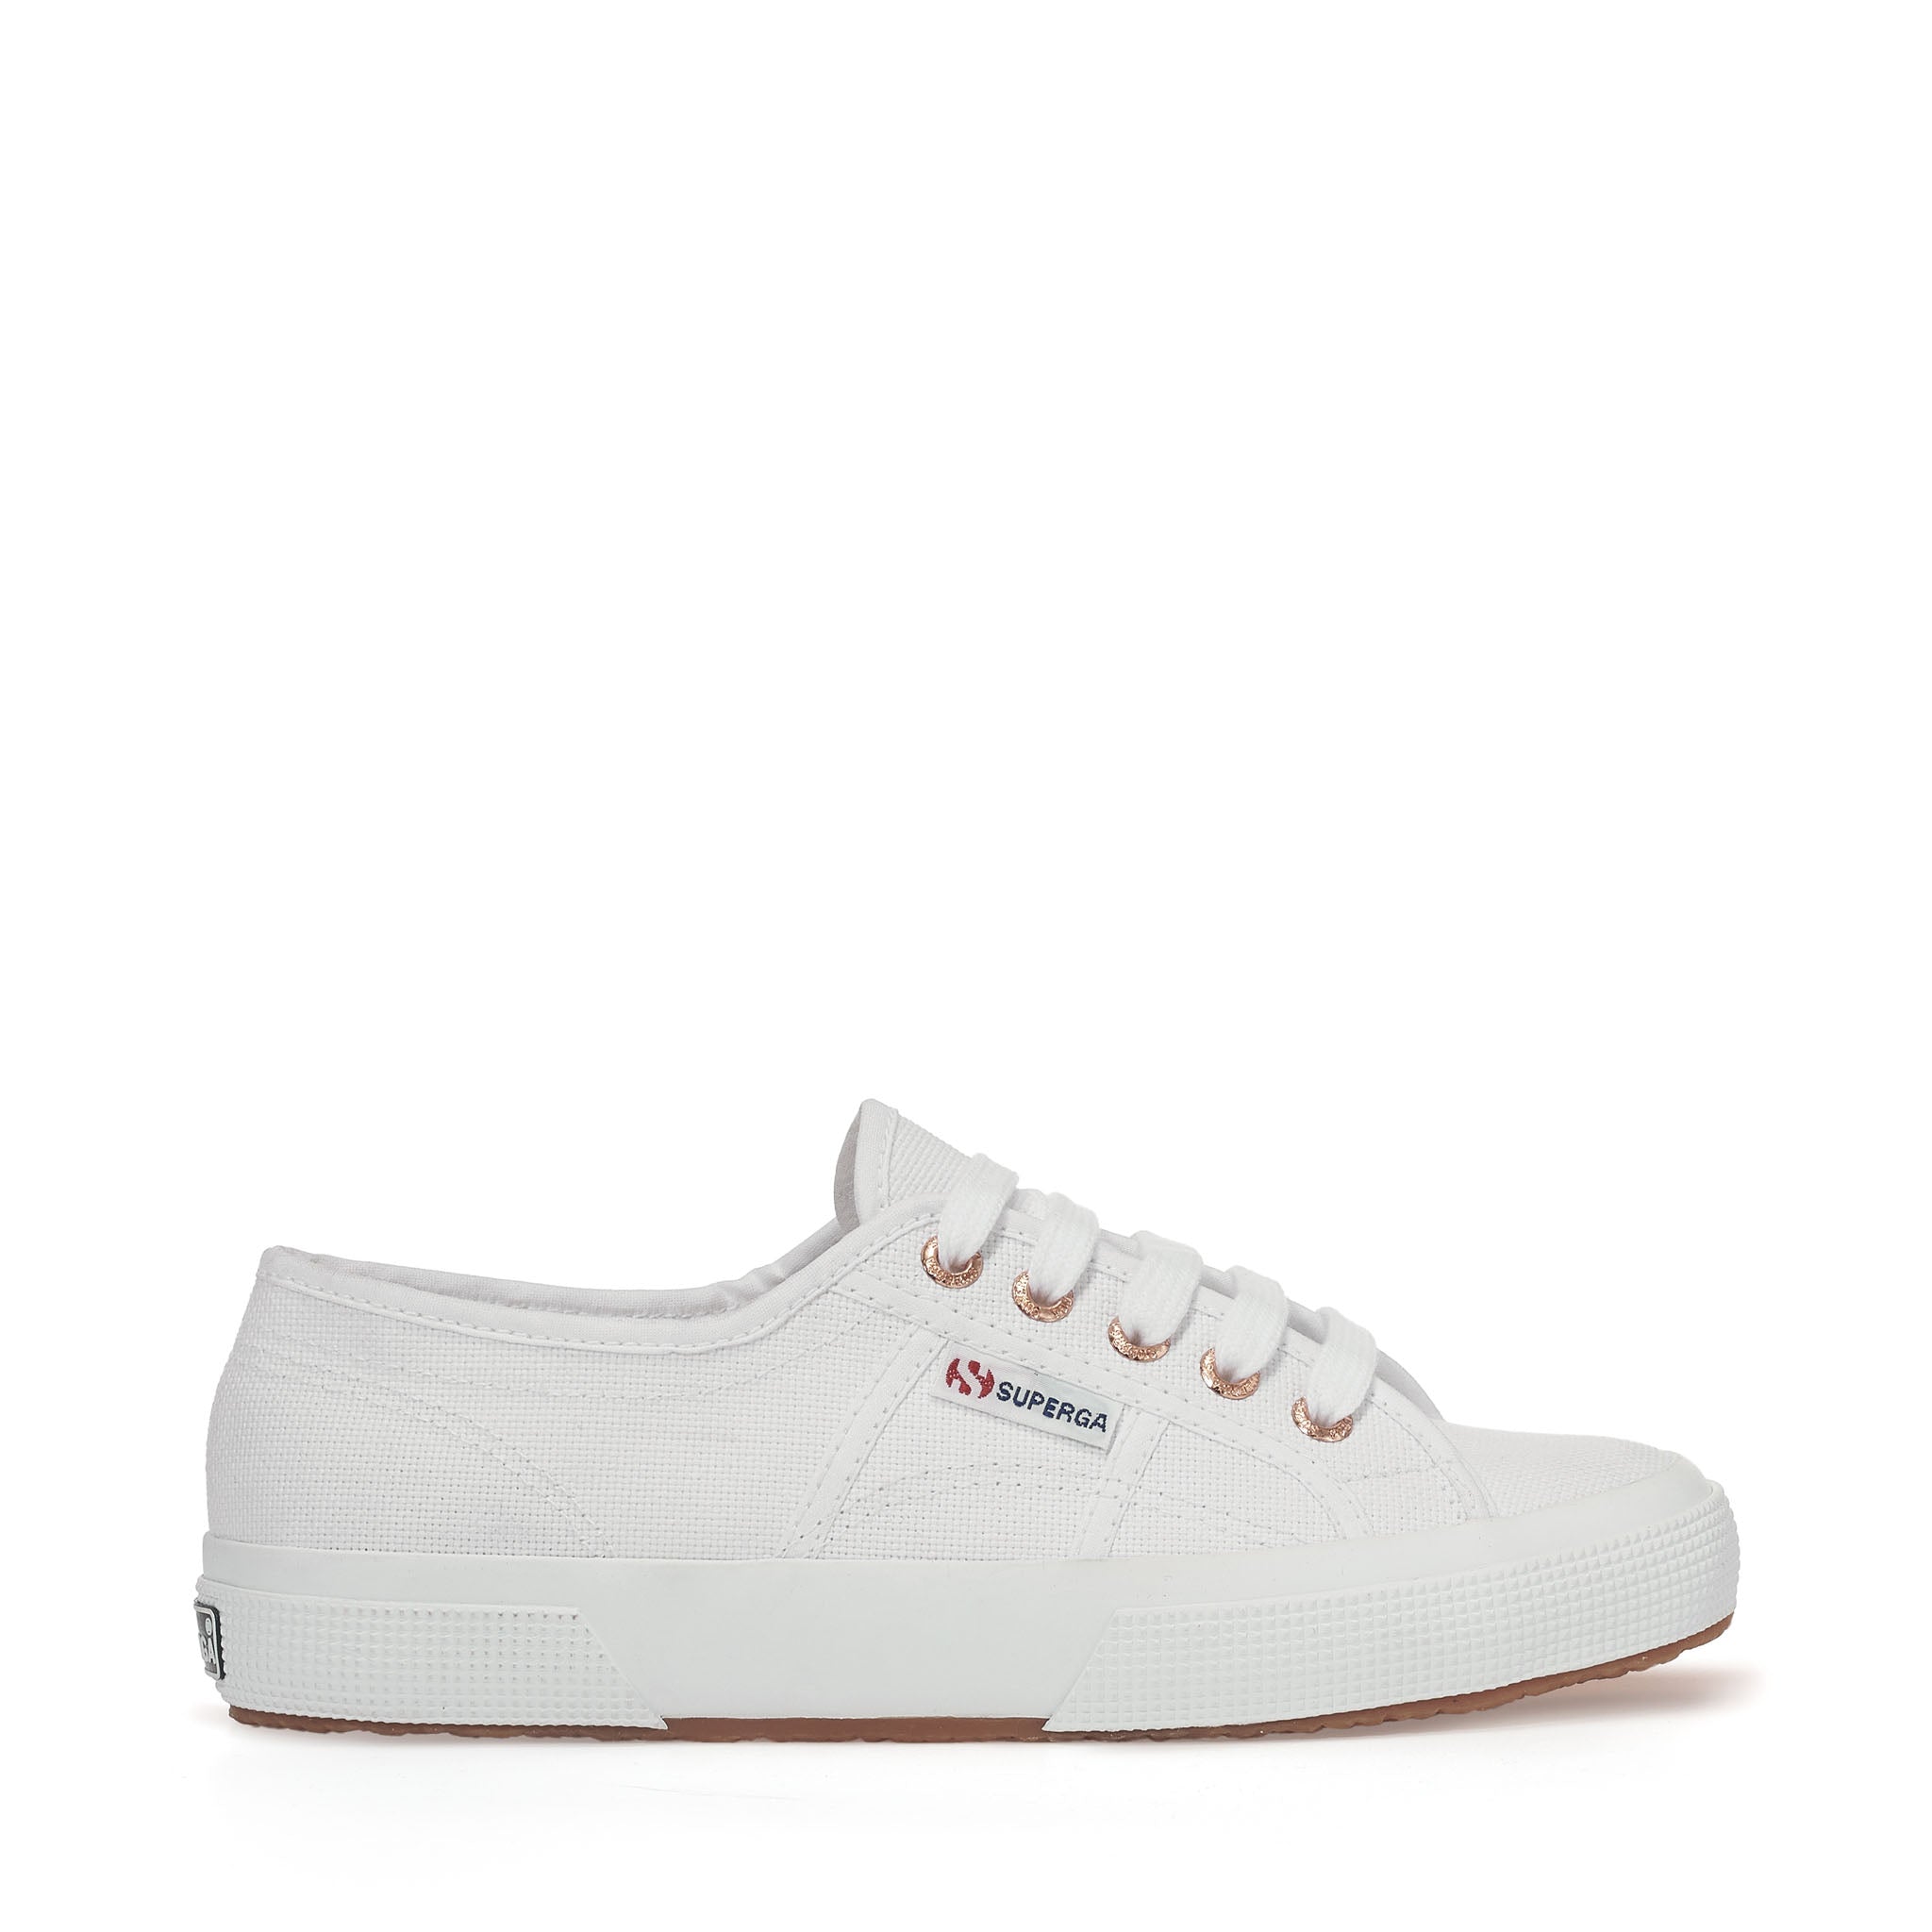 Superga 2750 Cotu Classic Sneakers - White Rose Gold. Side view.